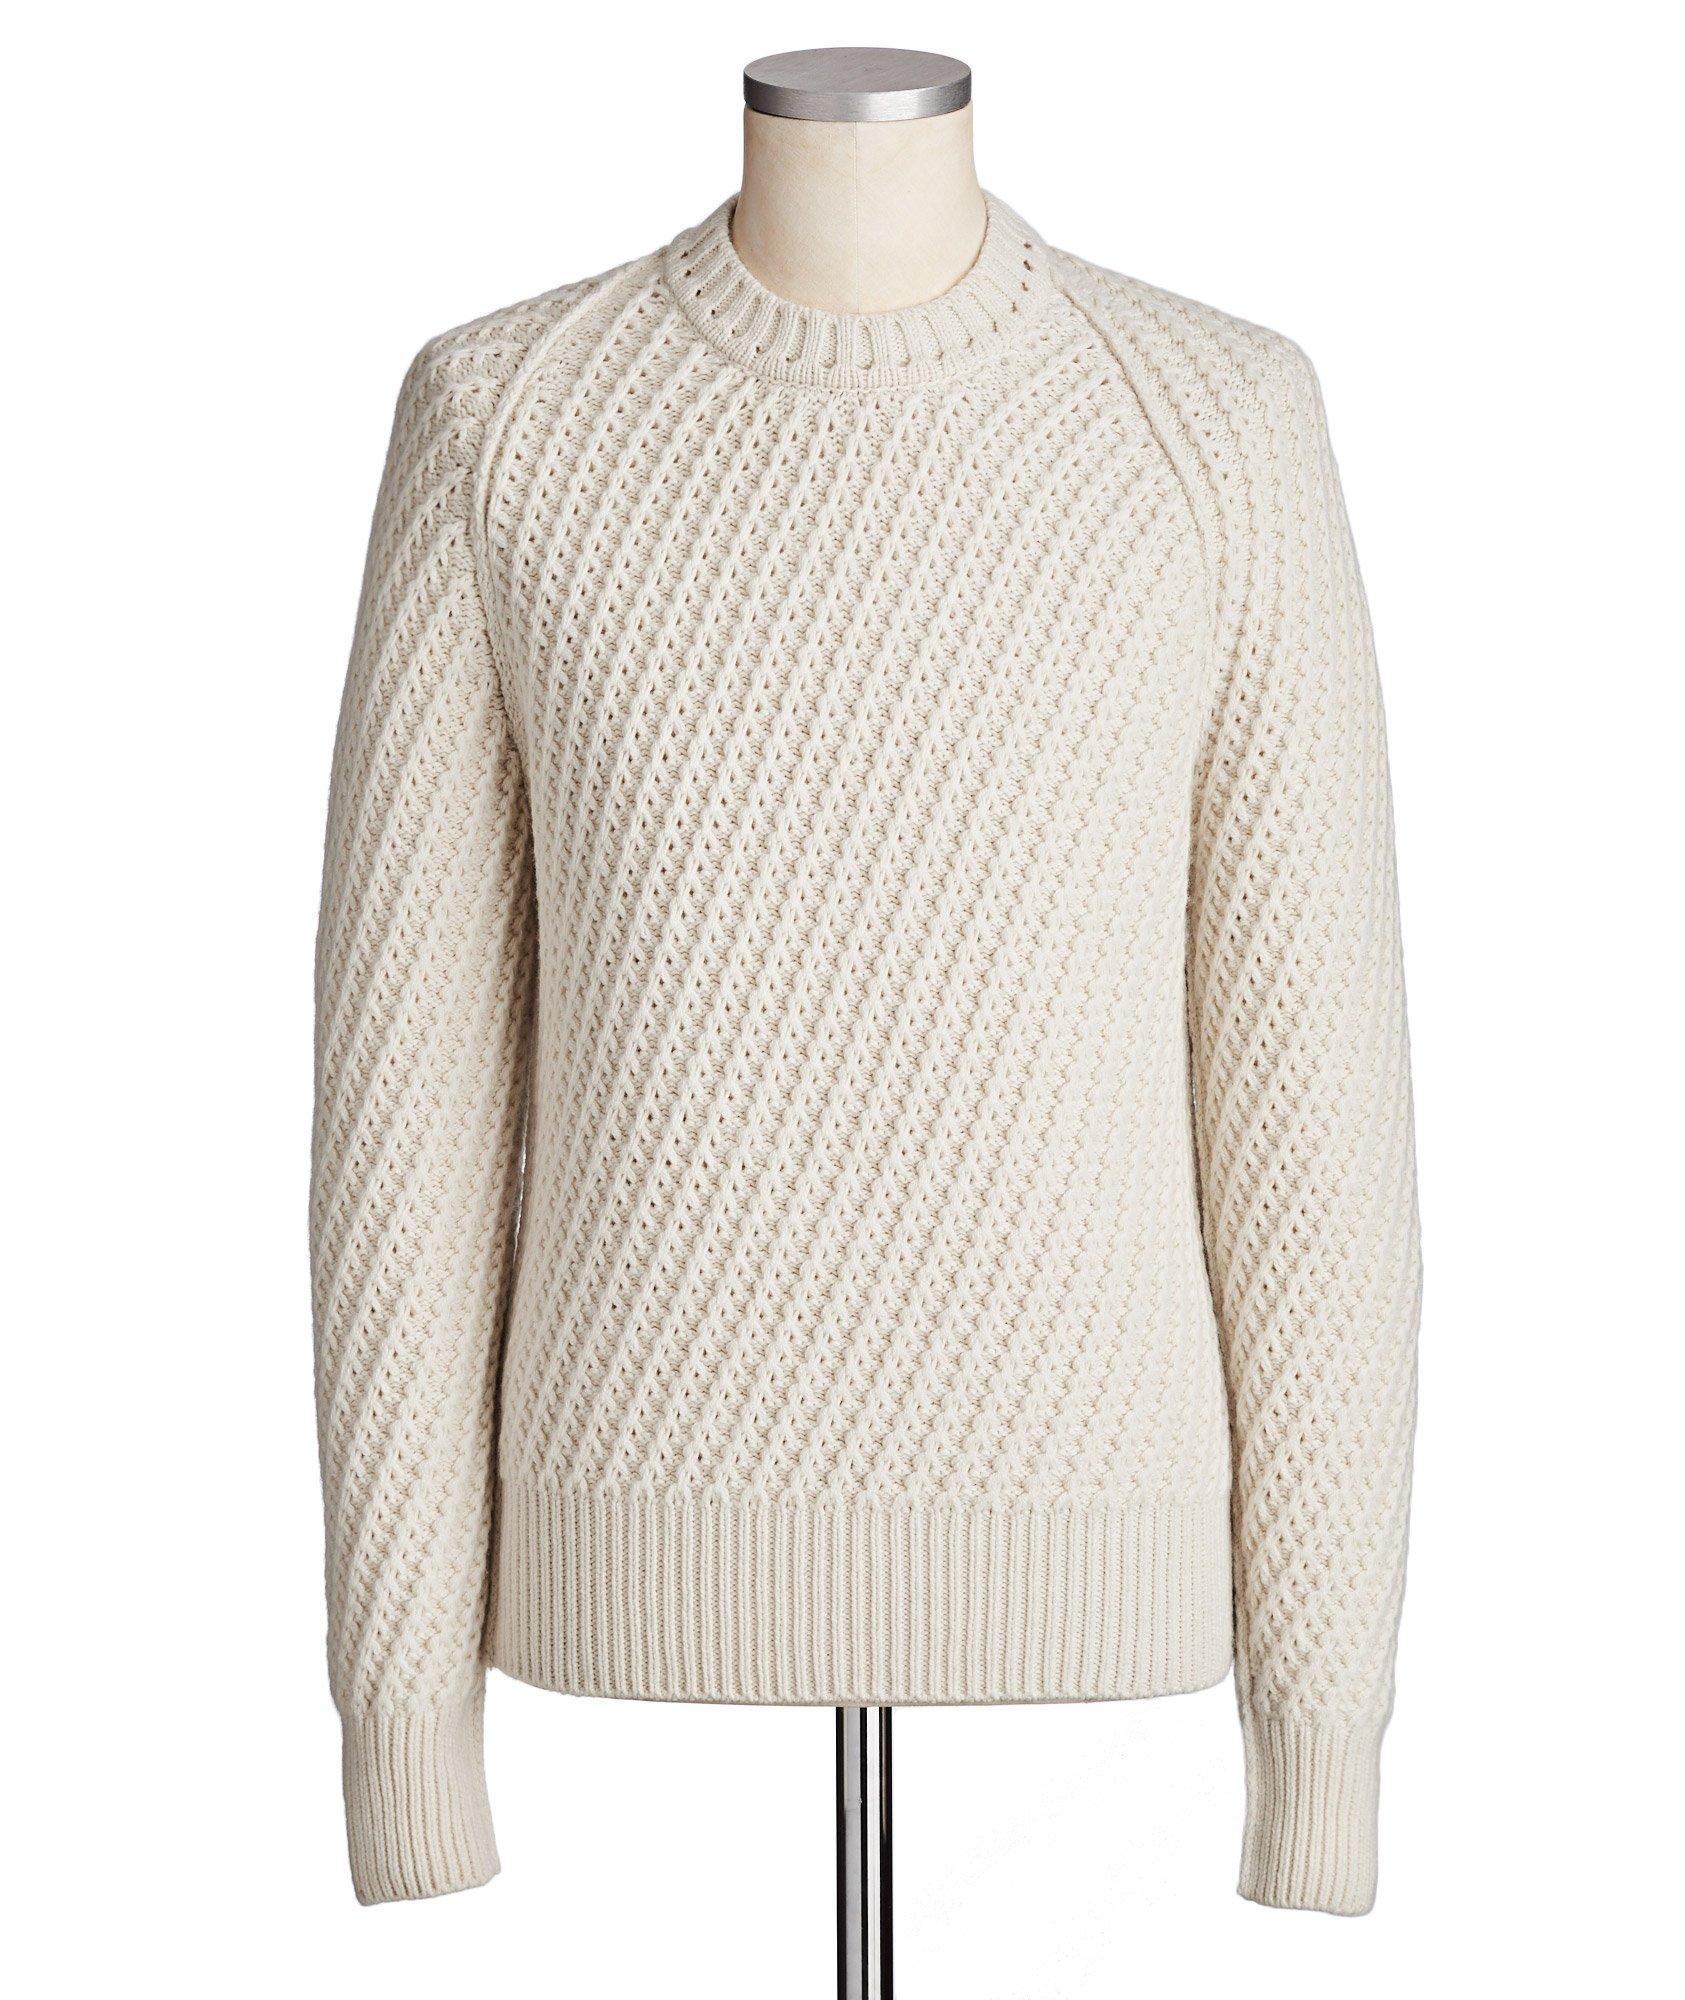 Cashmere & Wool Blend Sweater image 0